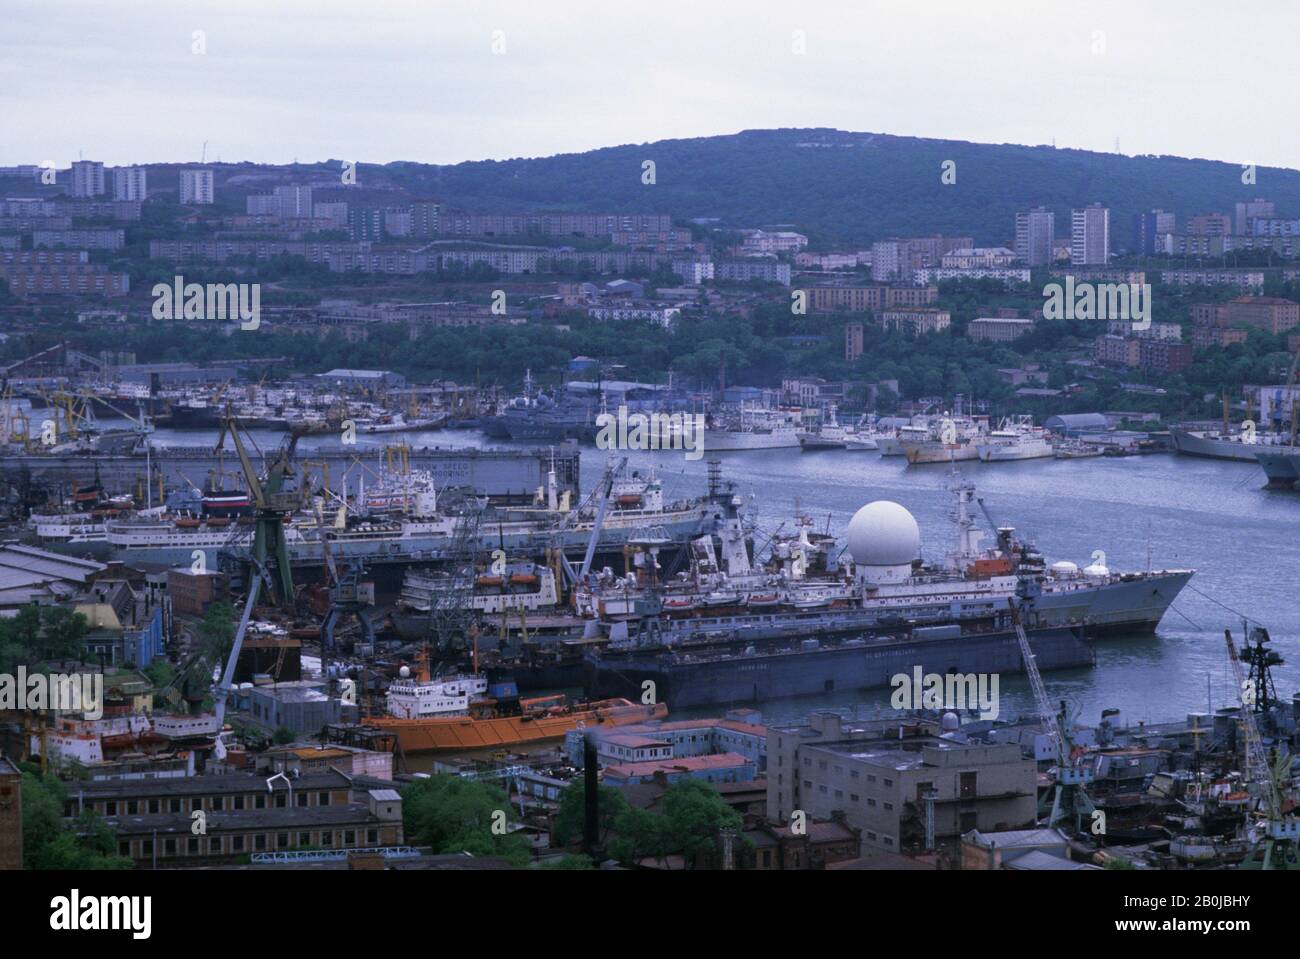 RUSSIA, VLADIVOSTOK, GOLDEN HORN BAY, VIEW OF PORT WITH NAVY SHIPS Stock Photo